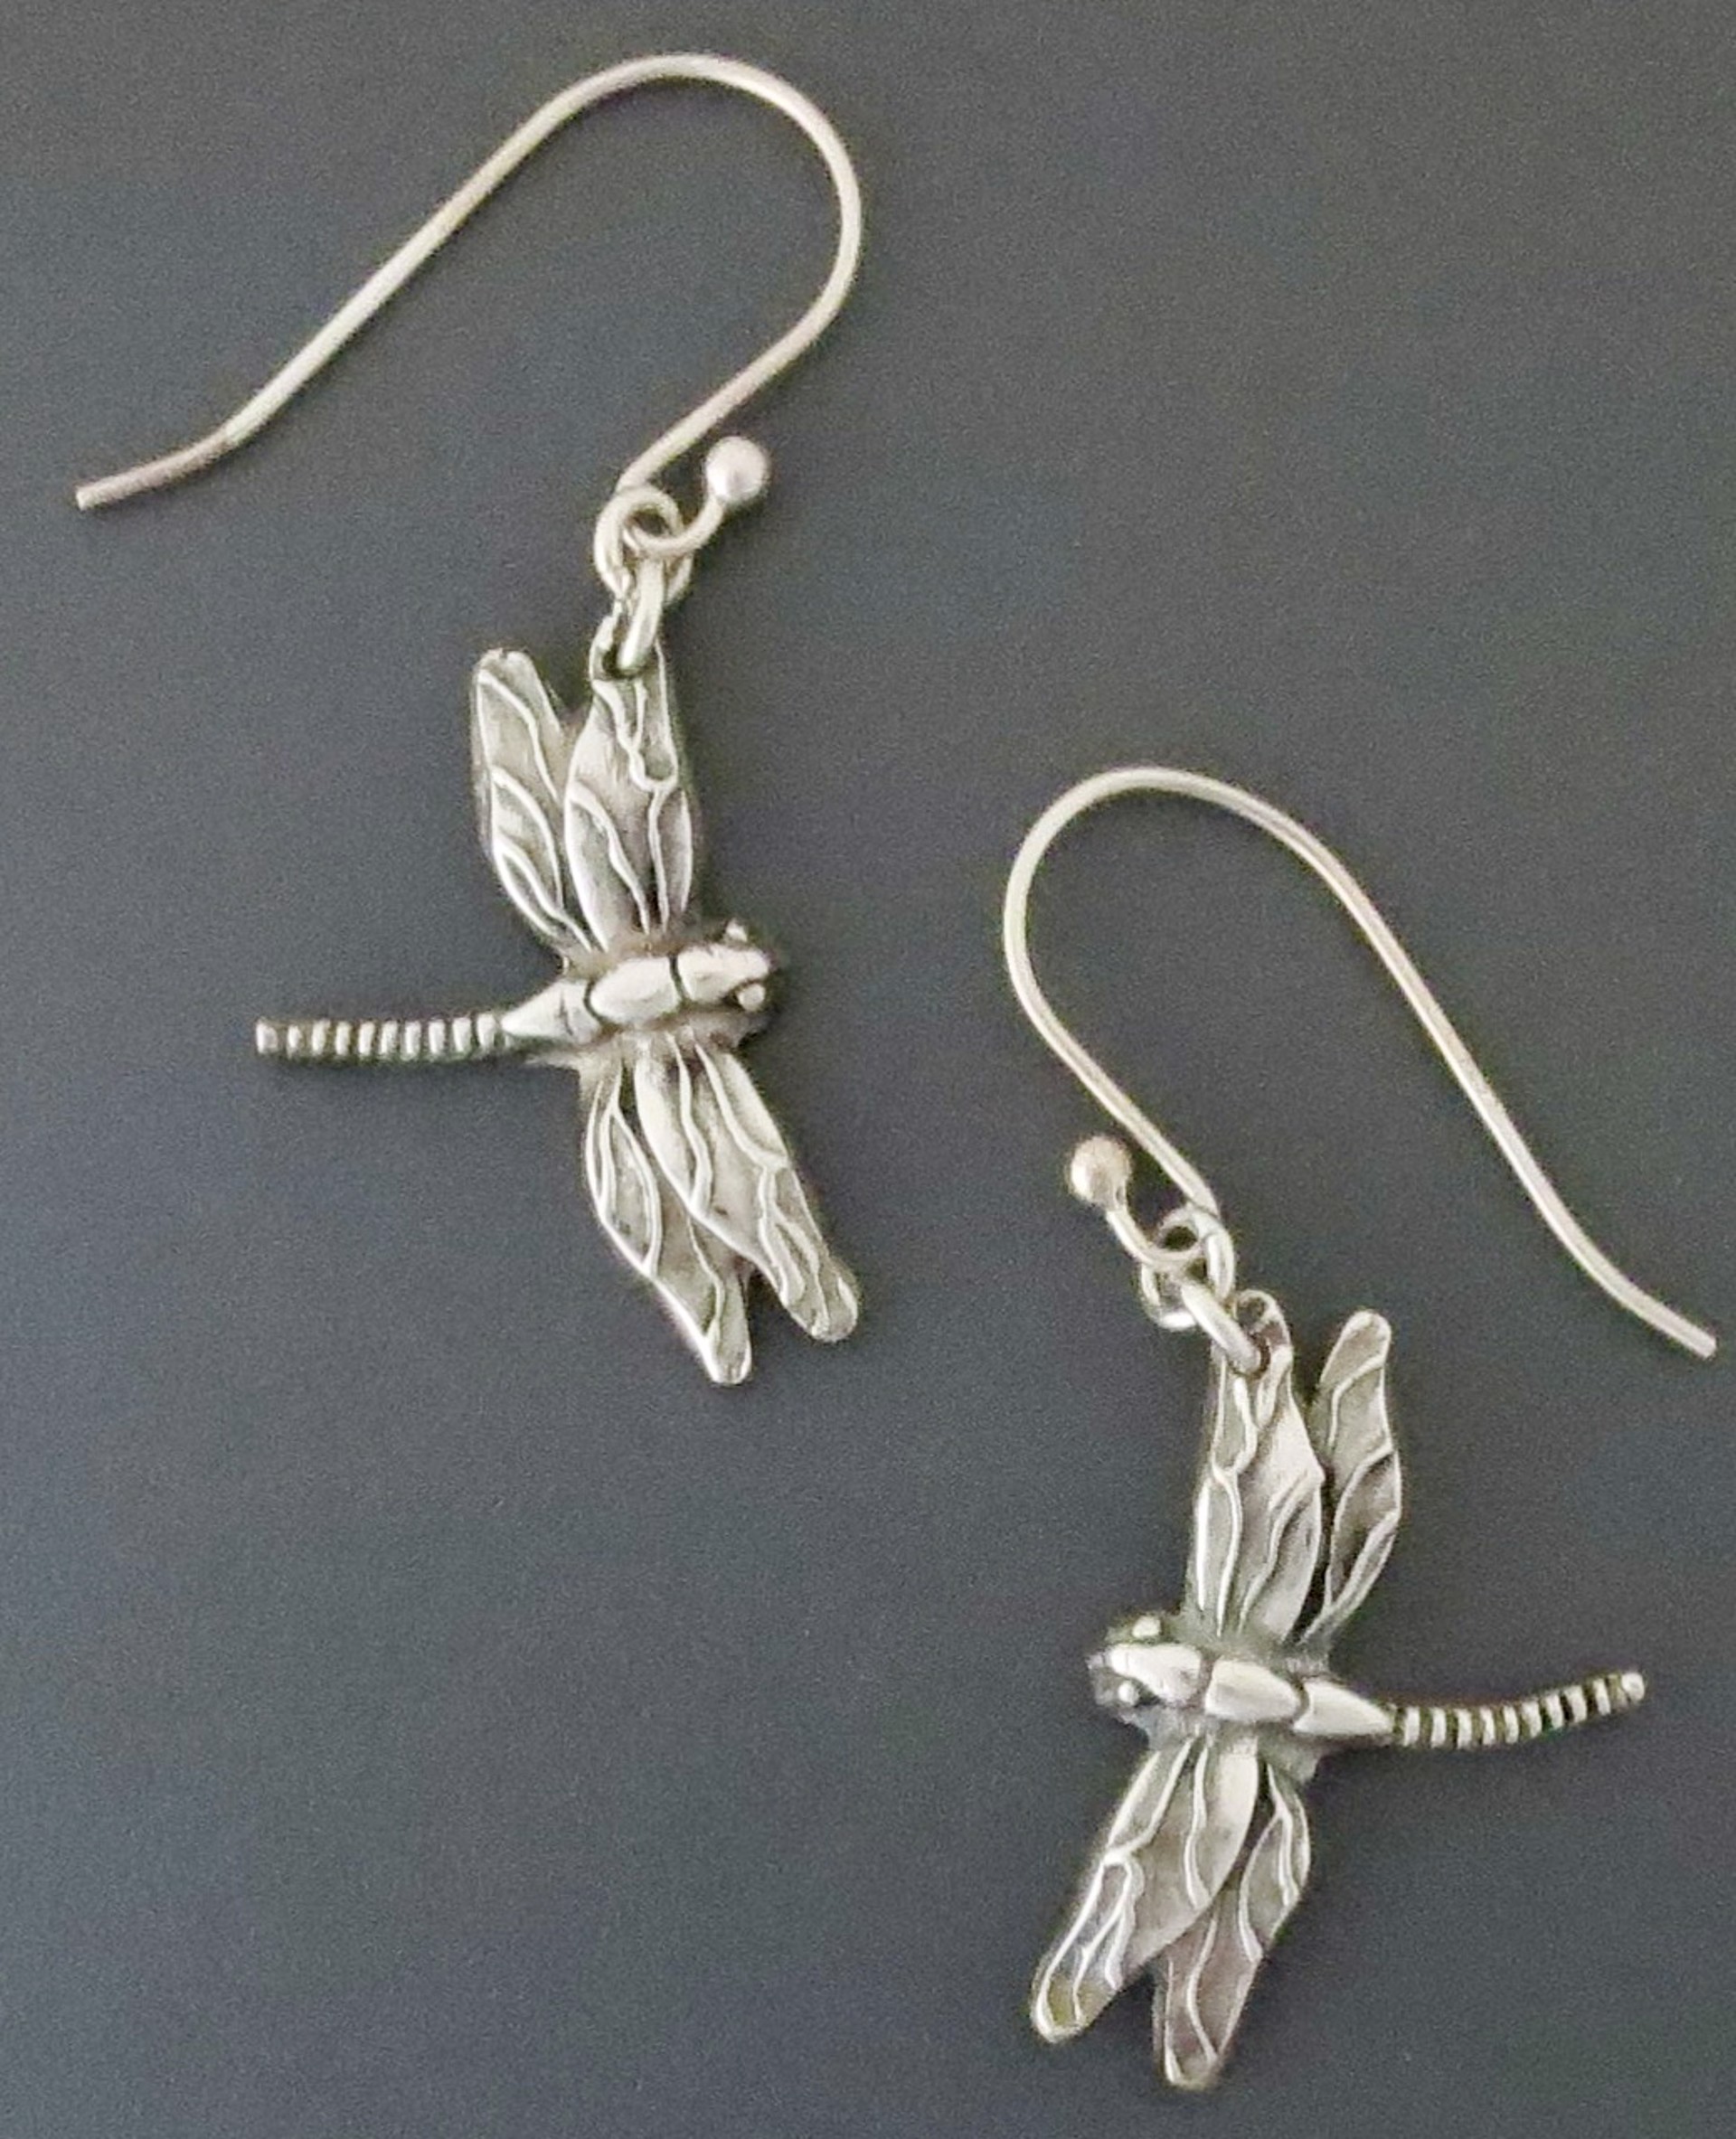 M-652 - Fine Silver Earrings by Donna Rittorno